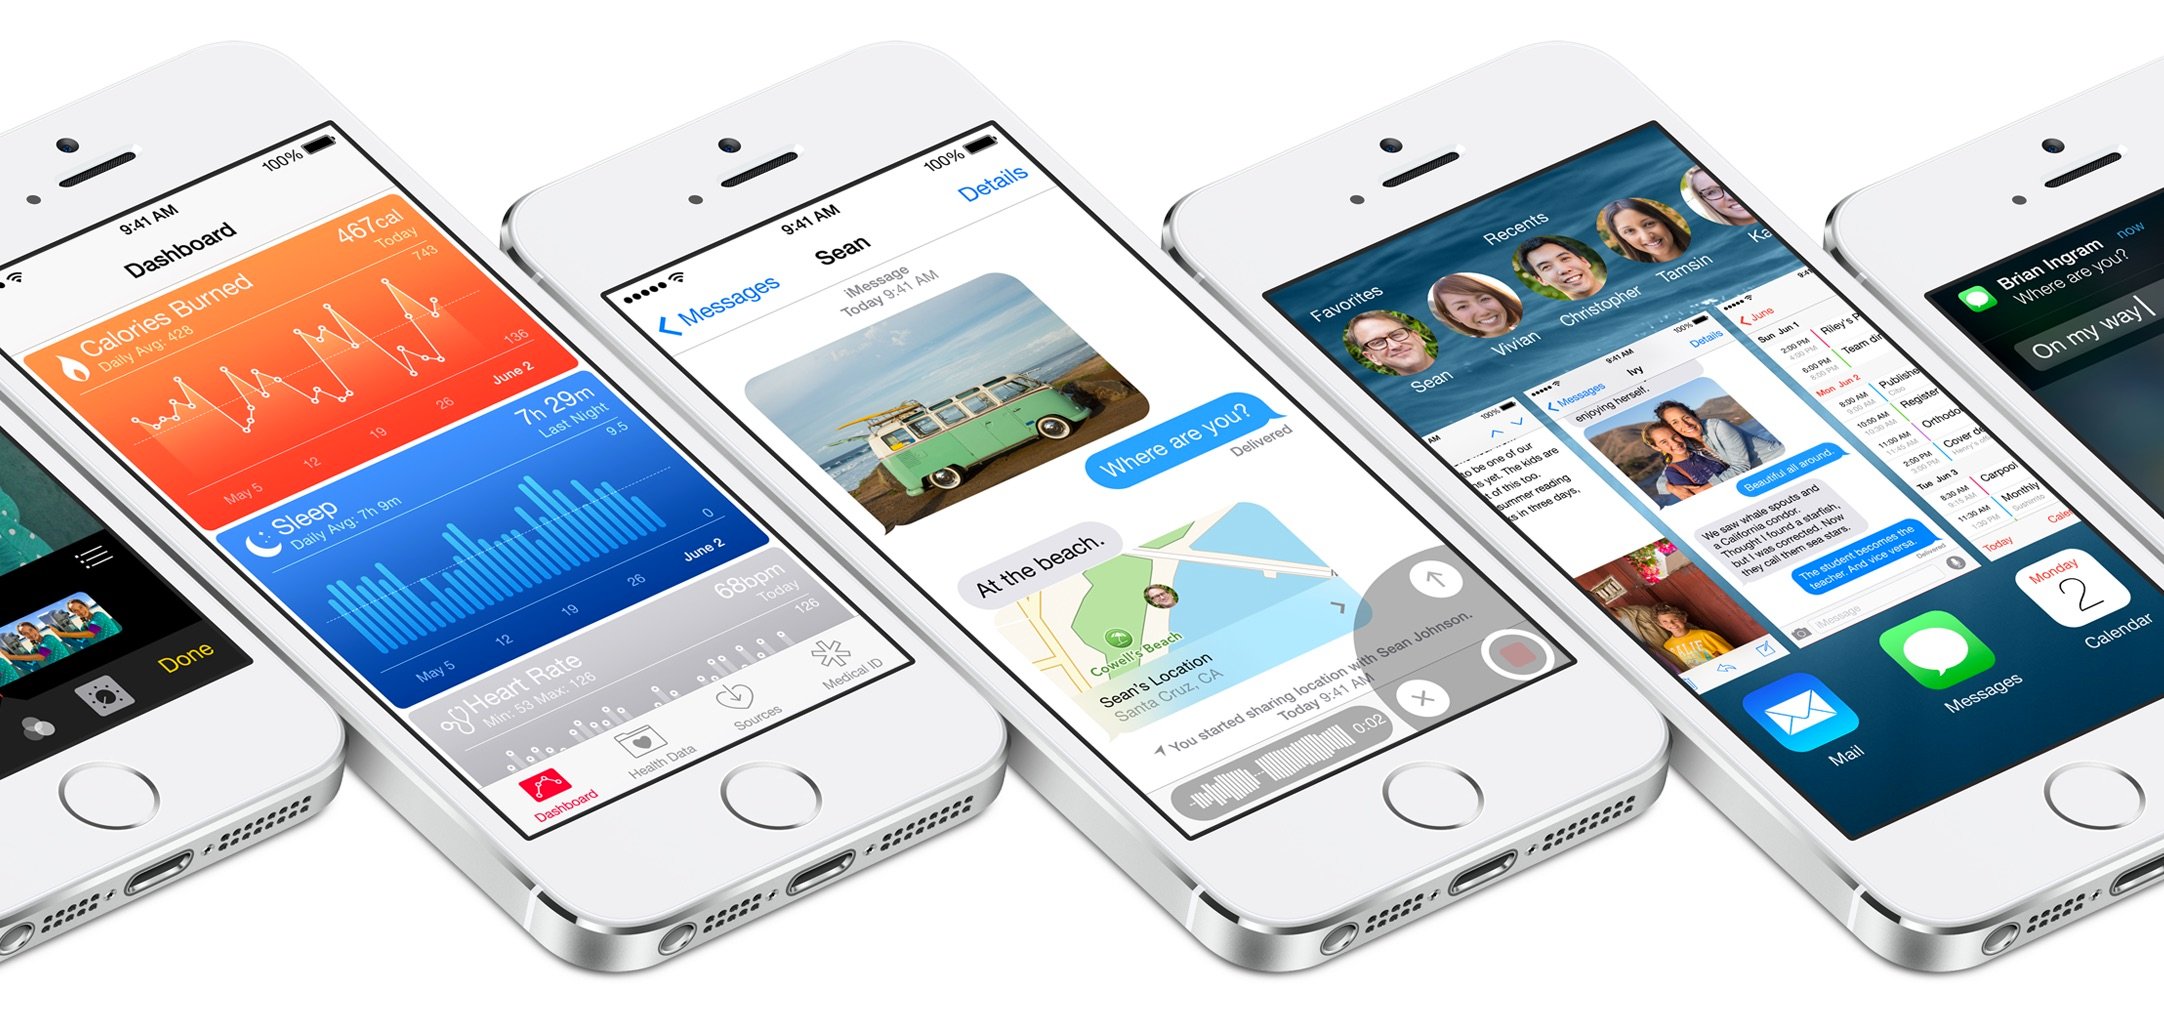 iOS 8 includes a collection of new features.